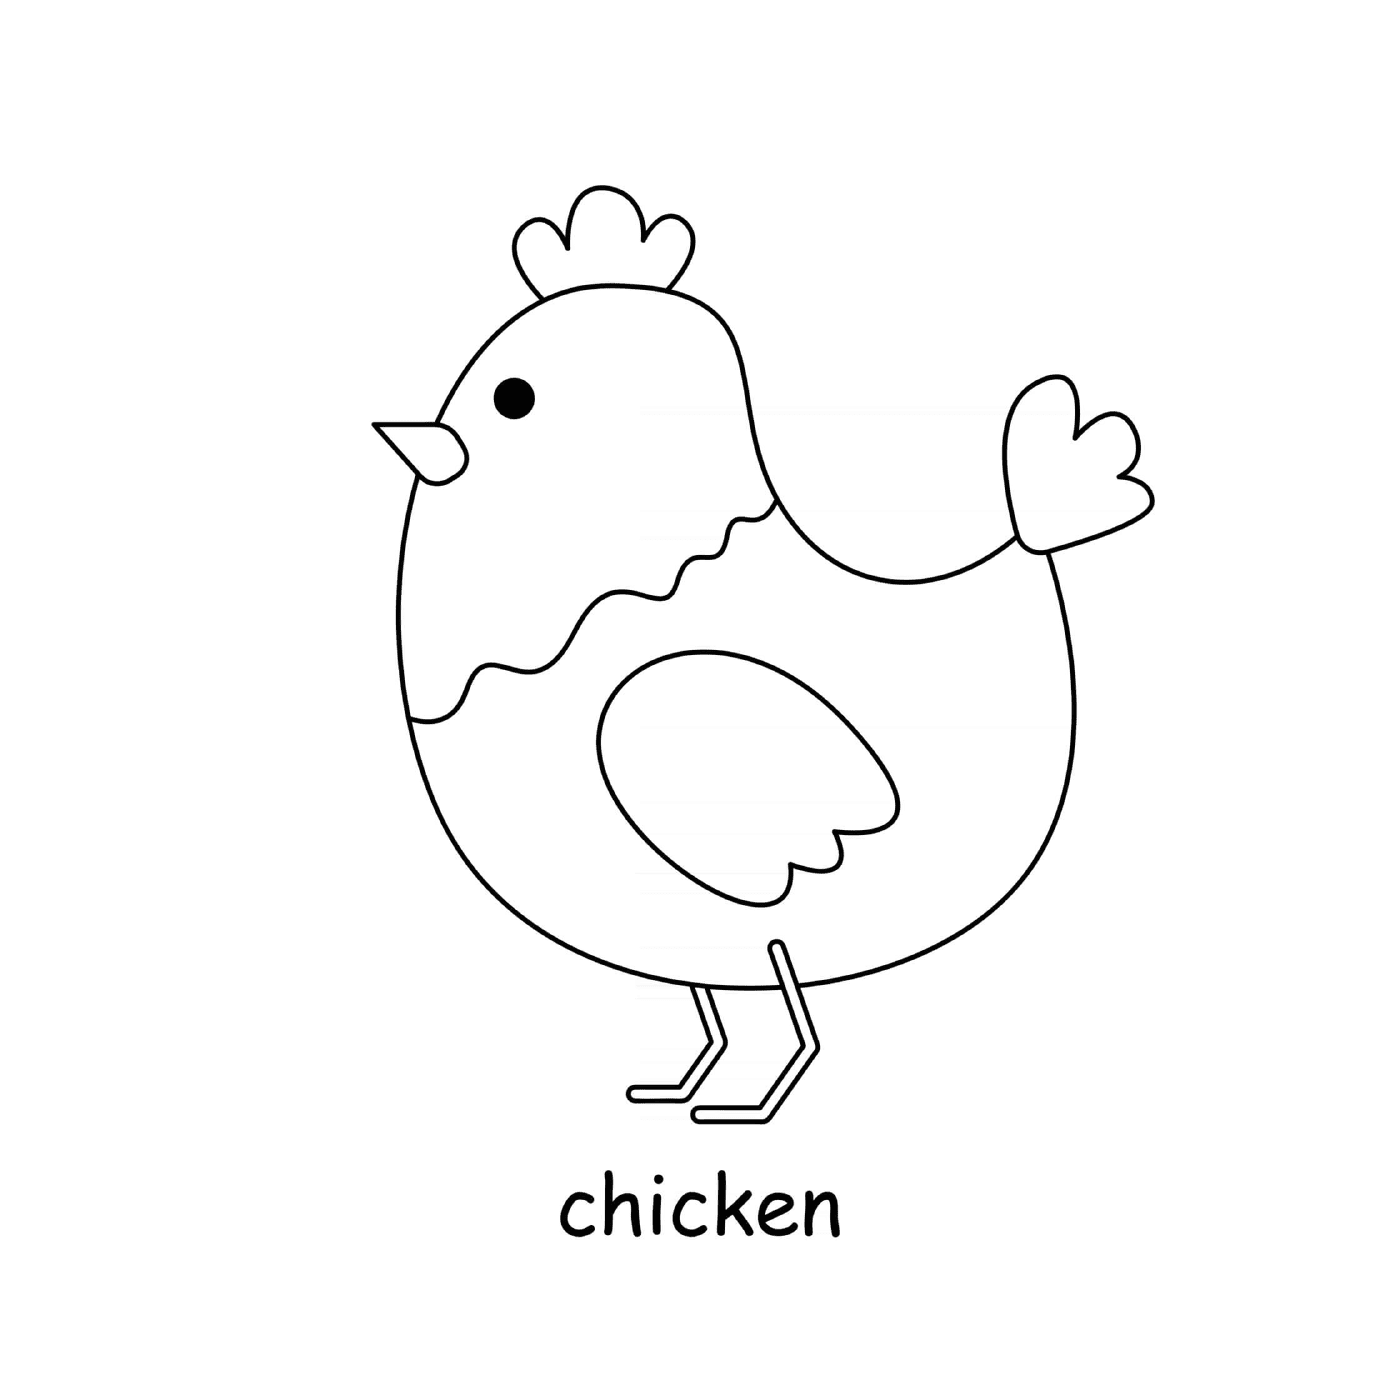  Animal chicken from the farm 